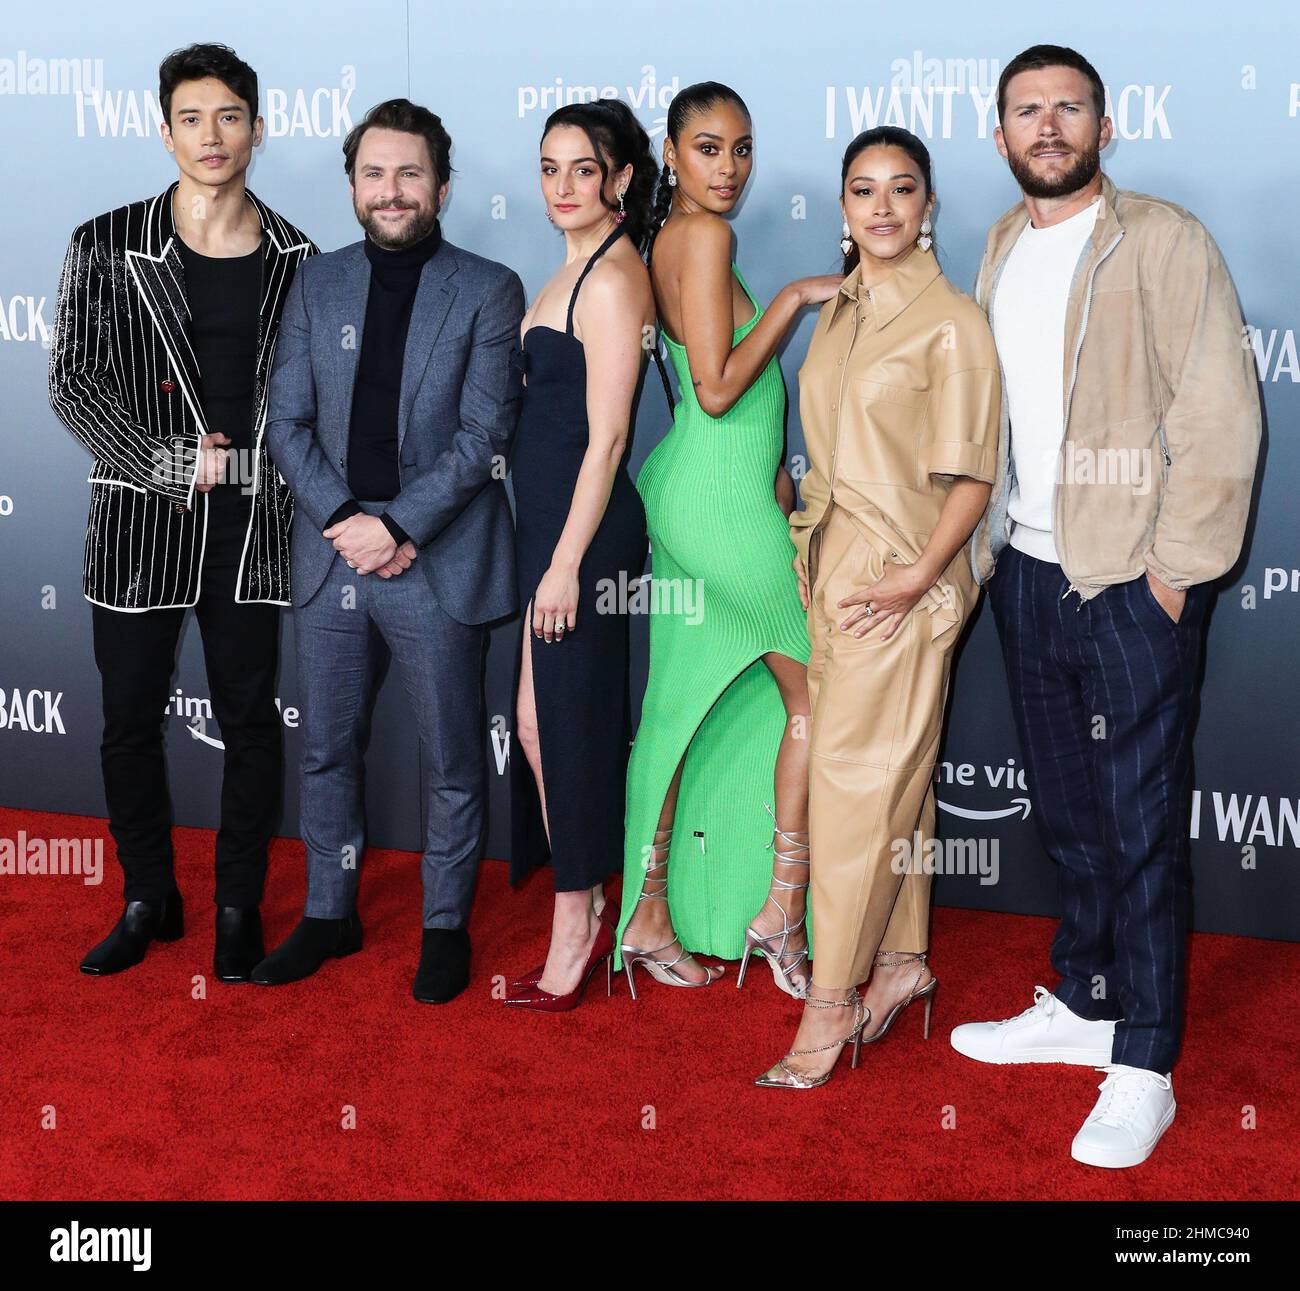 Los Angeles, United States. 08th Feb, 2022. LOS ANGELES, CALIFORNIA, USA - FEBRUARY 08: Actors Manny Jacinto, Charlie Day, Jenny Slate, Clark Backo, Gina Rodriguez and Scott Eastwood arrive at the Los Angeles Premiere Of Amazon Prime's 'I Want You Back' held at ROW DTLA on February 8, 2022 in Los Angeles, California, United States. (Photo by Xavier Collin/Image Press Agency) Credit: Image Press Agency/Alamy Live News Stock Photo